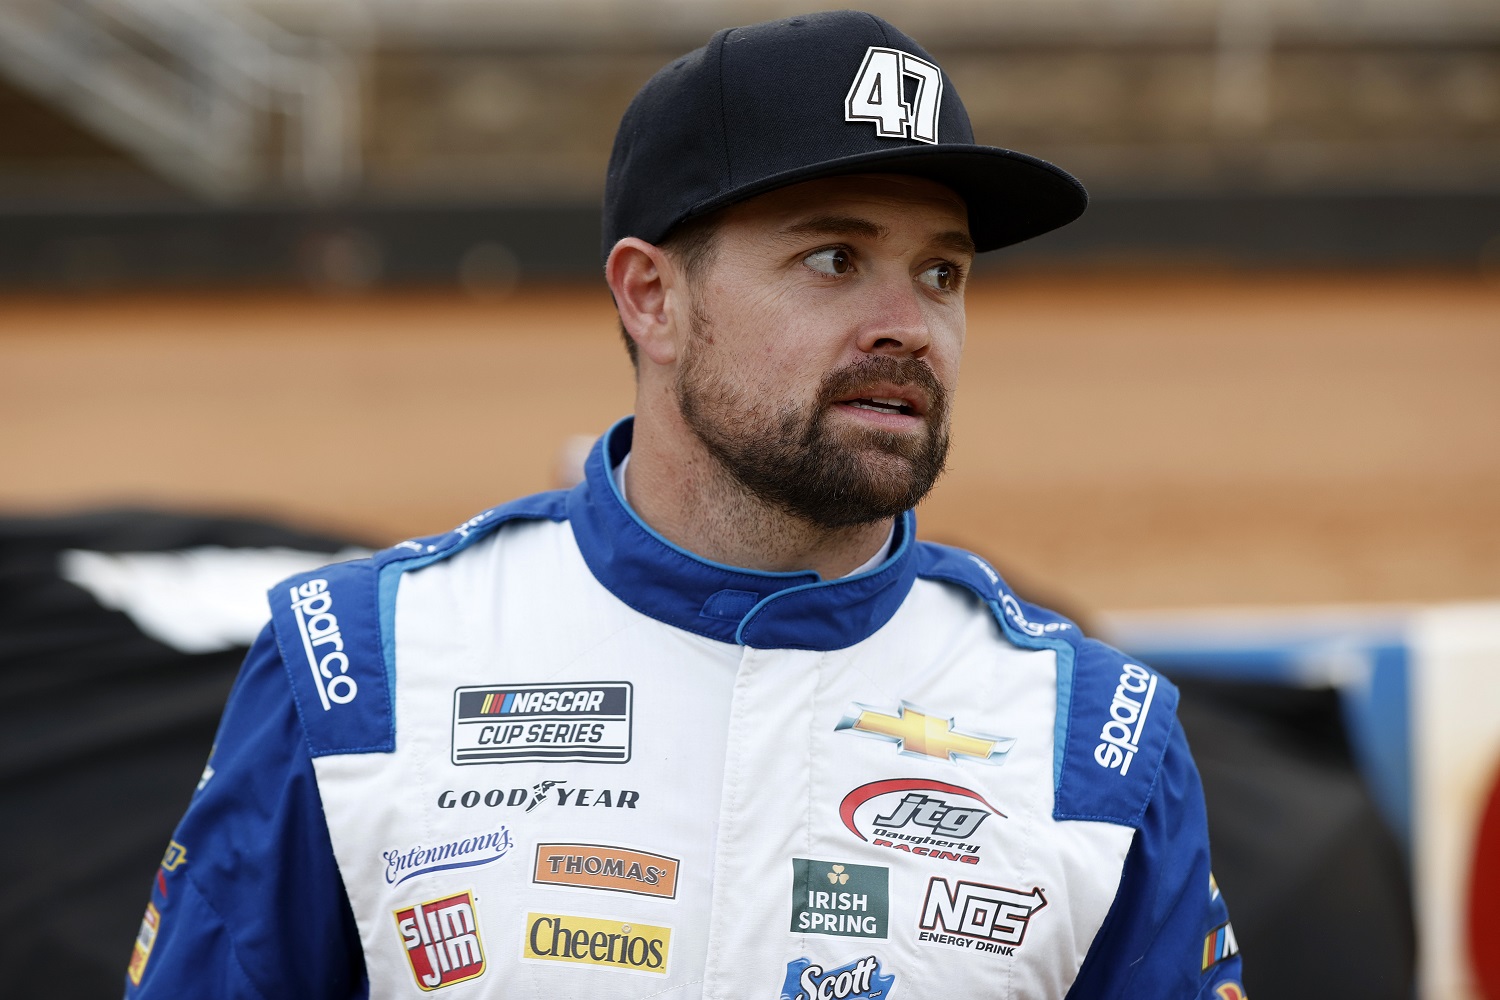 Ricky Stenhouse Jr., waits on the grid prior to the NASCAR Cup Series Food City Dirt Race at Bristol Motor Speedway on April 17, 2022.